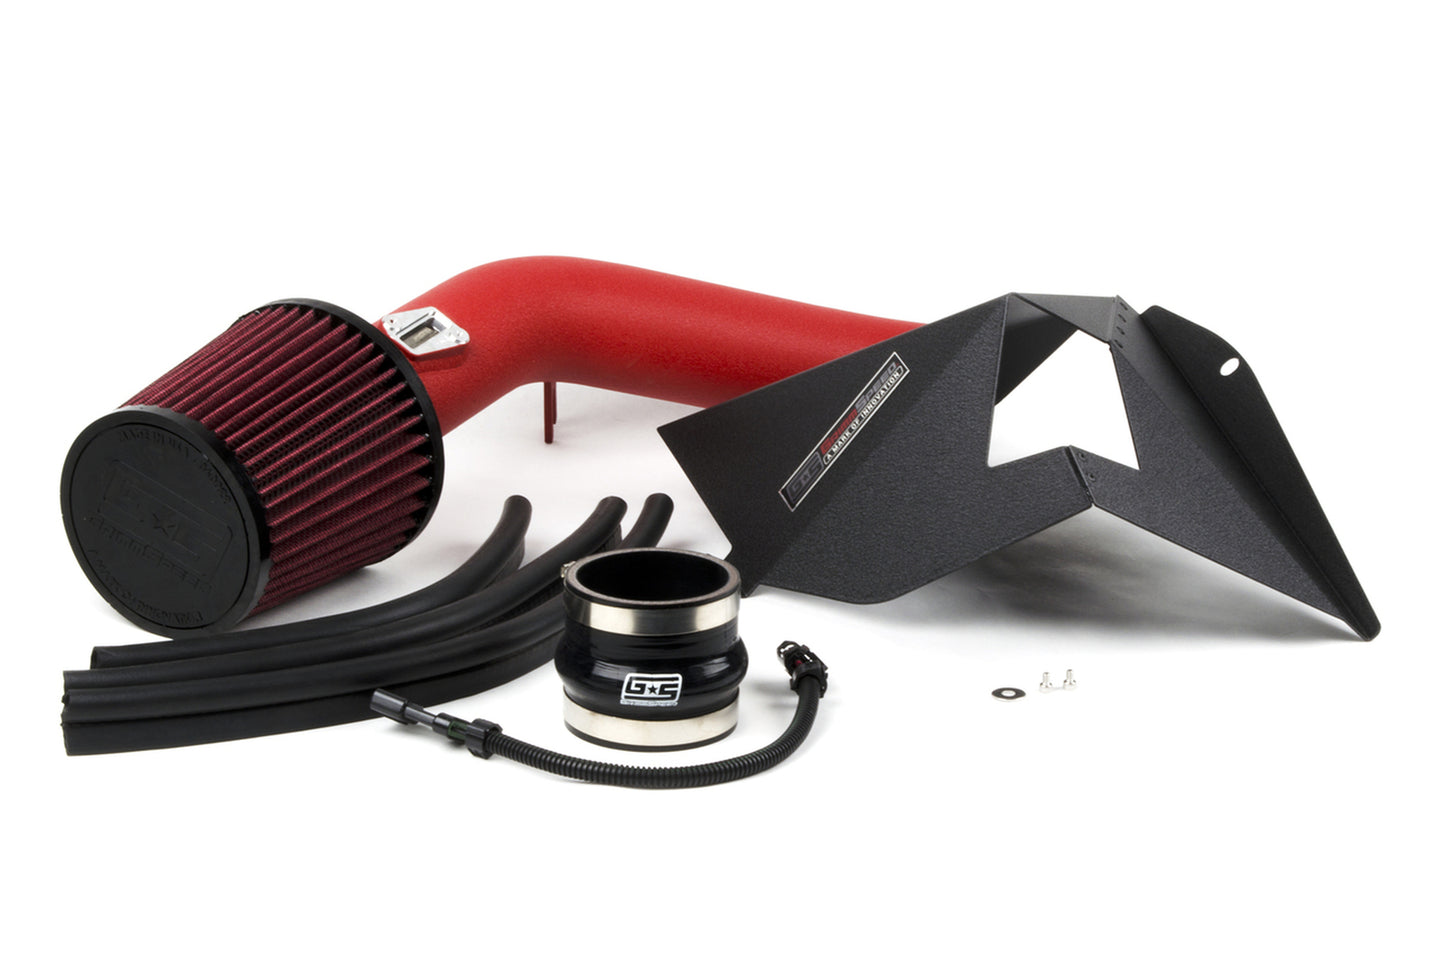 Grimmspeed Stage 1 Red Power Package Subaru WRX 15-21 | grm191010-RD